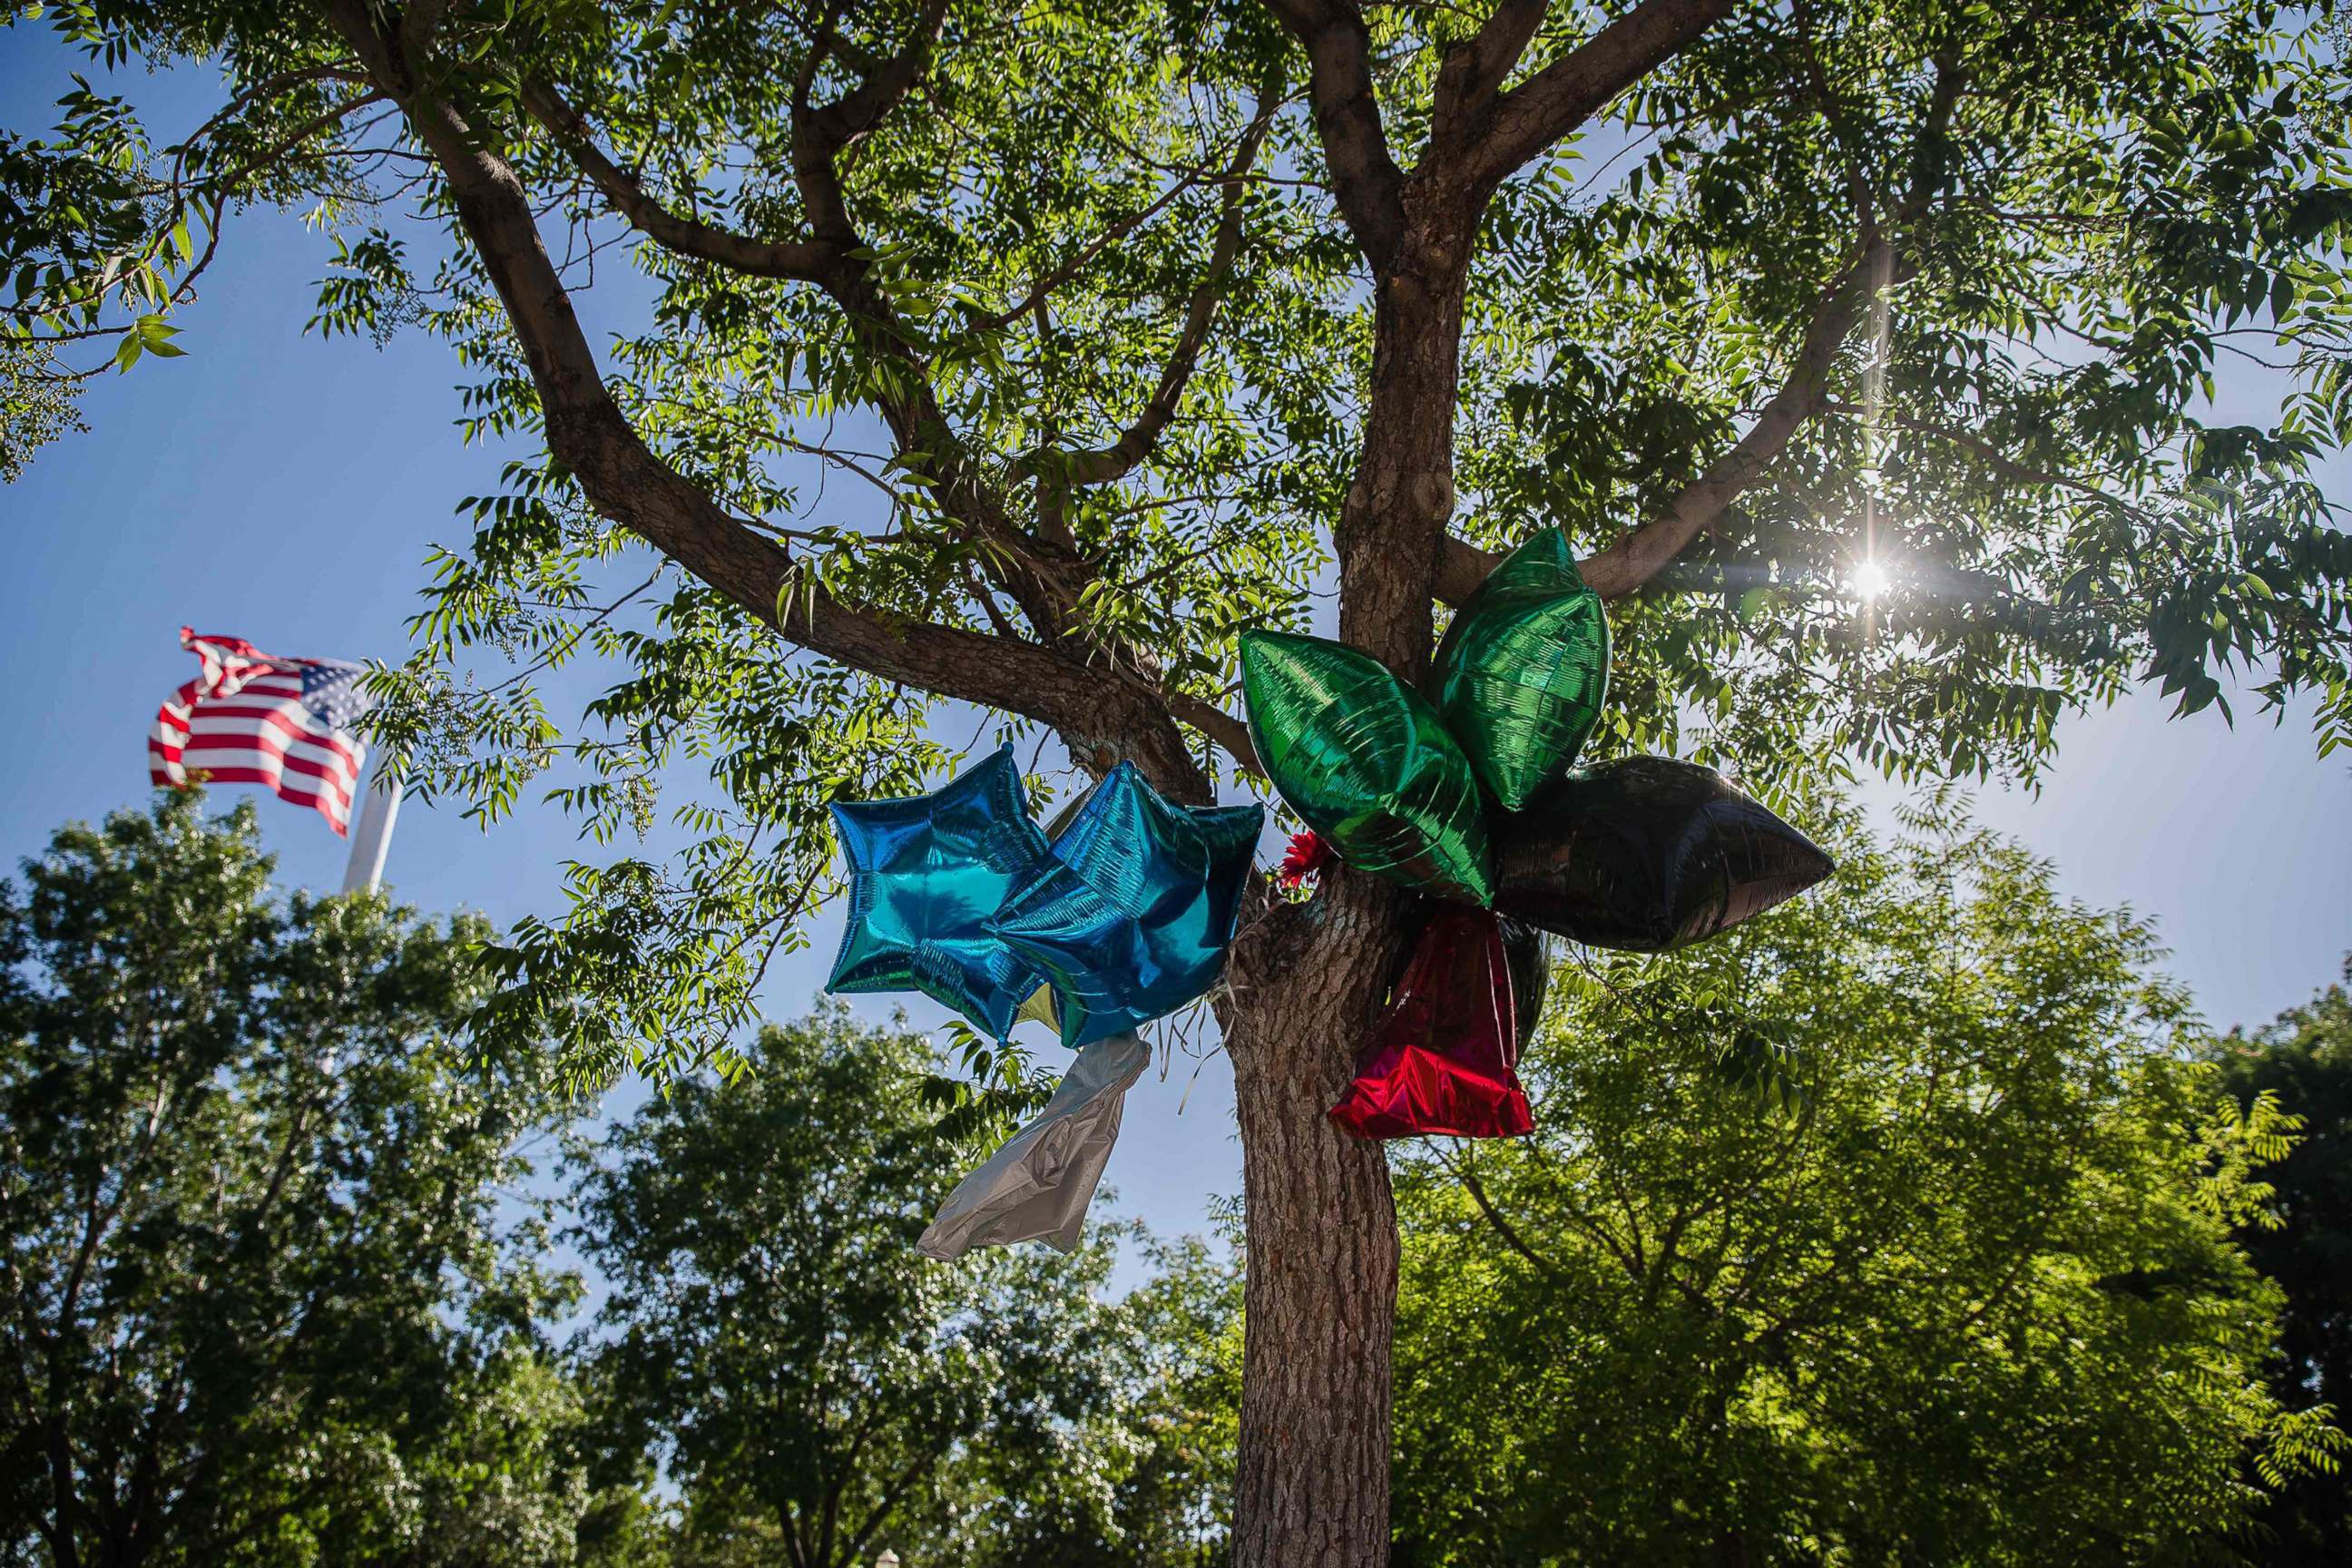 PHOTO: Balloons hang from a tree as a makeshift memorial for Robert Fuller at Palmdale City Hall, as people gather to demand justice for Robert Fuller, a young black man who was found hanging from a tree, on June 16, 2020, in Palmdale, Calif.